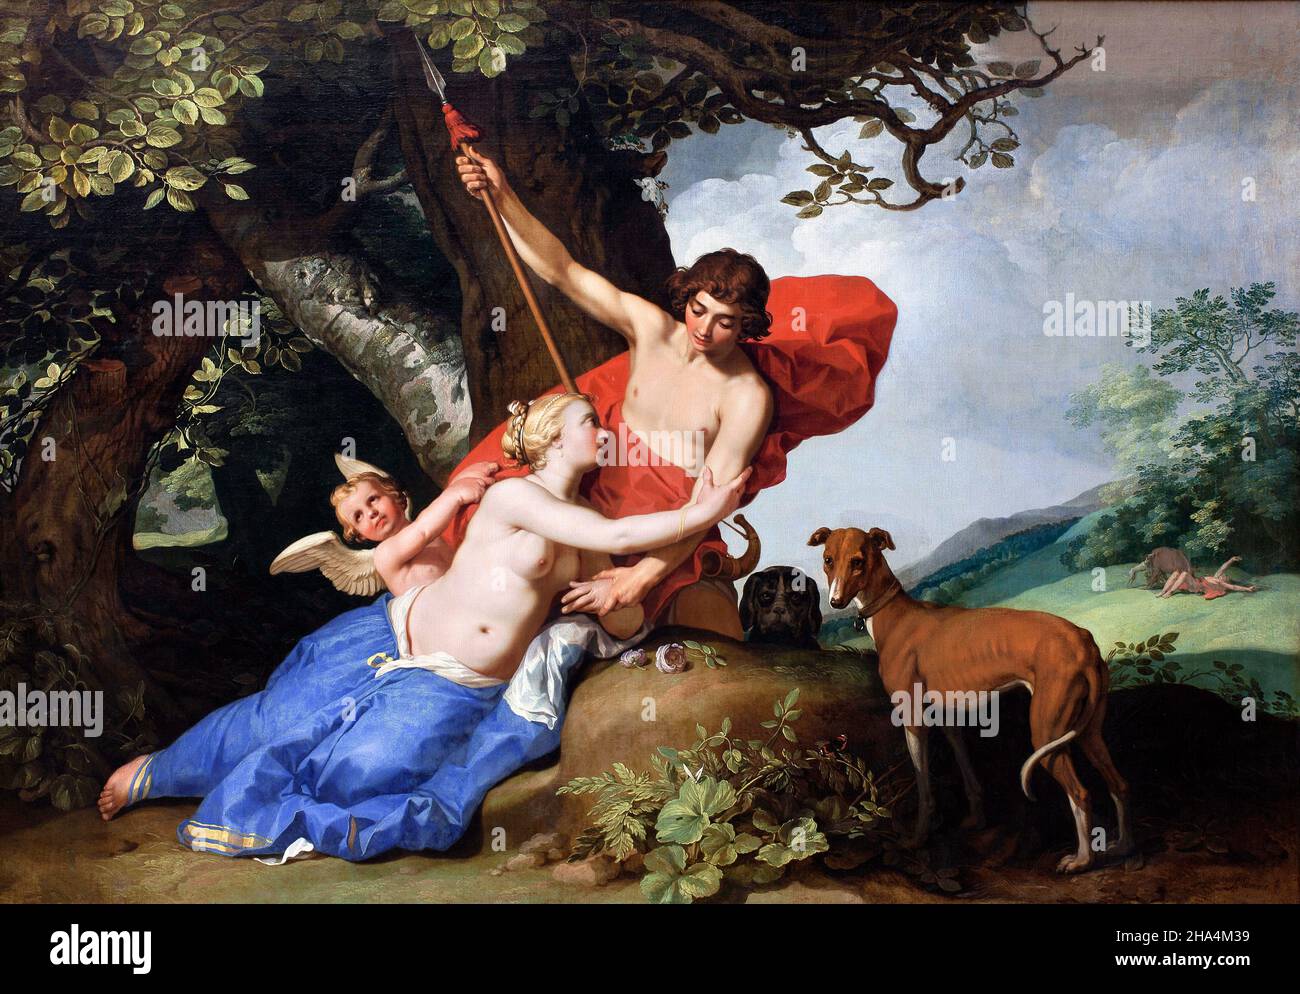 Venus and Adonis by the Dutch artist, Abraham Bloemaert (1566-1651), oil on canvas, 1632 Stock Photo